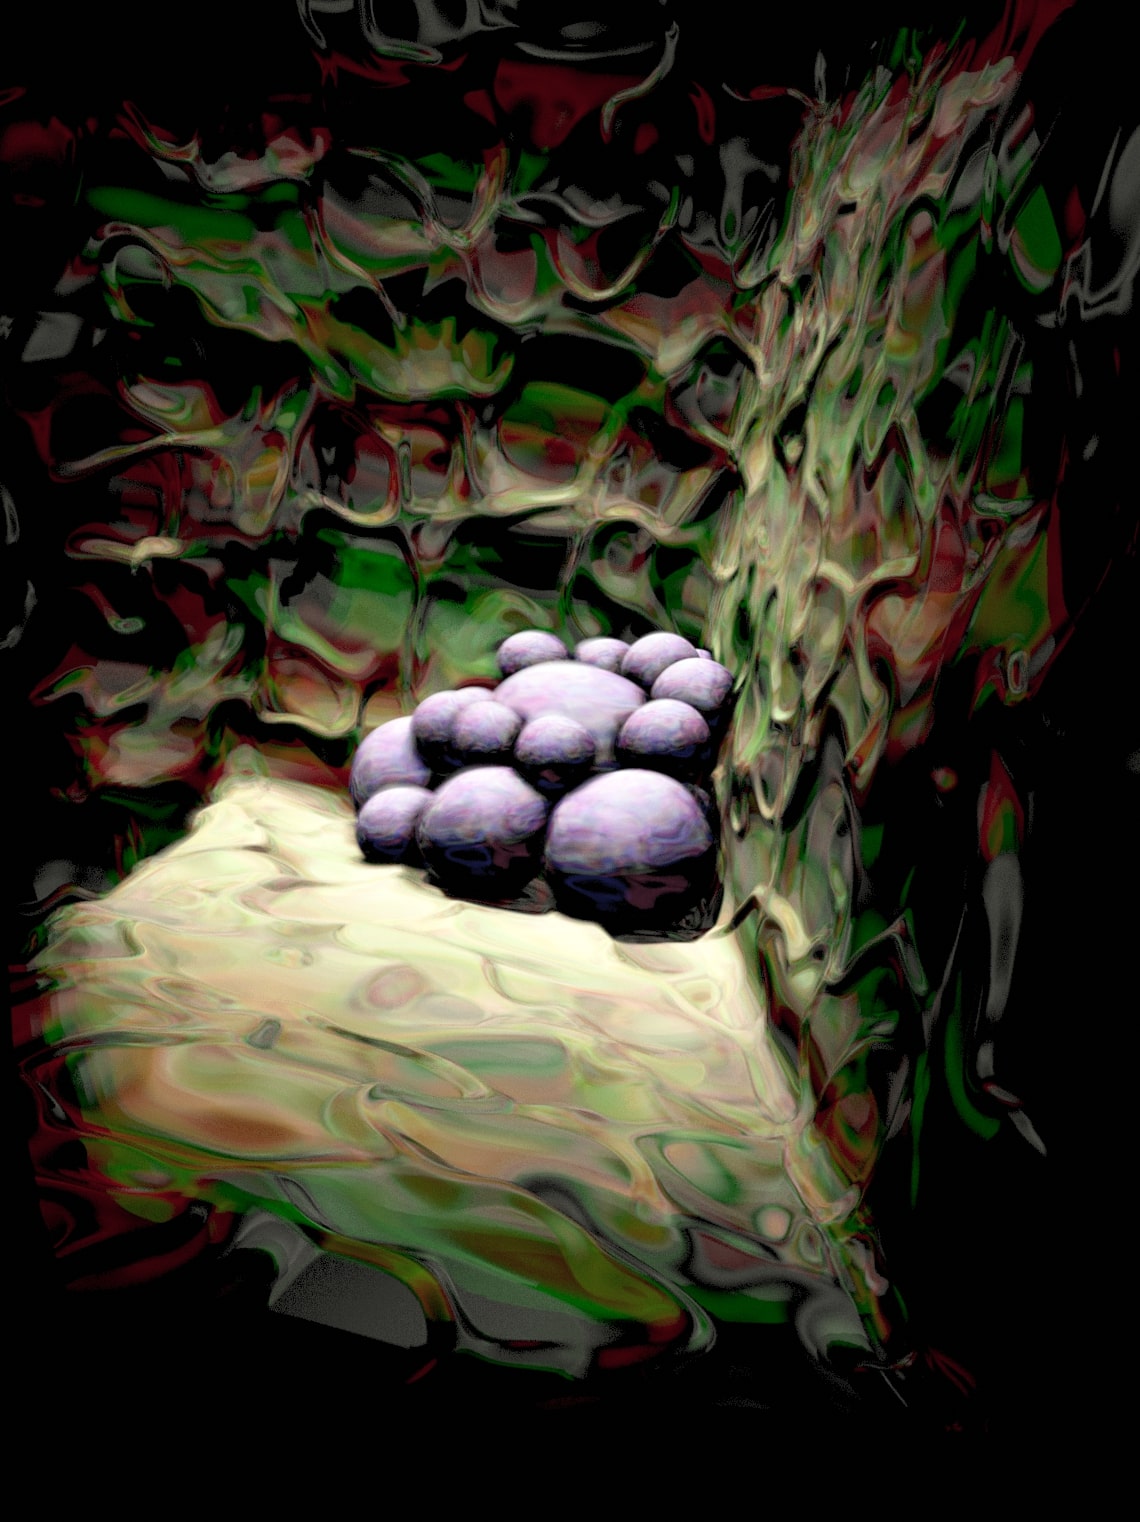 A digital image of a dark room with textured green-brown walls and a mass of purple balls in one corner